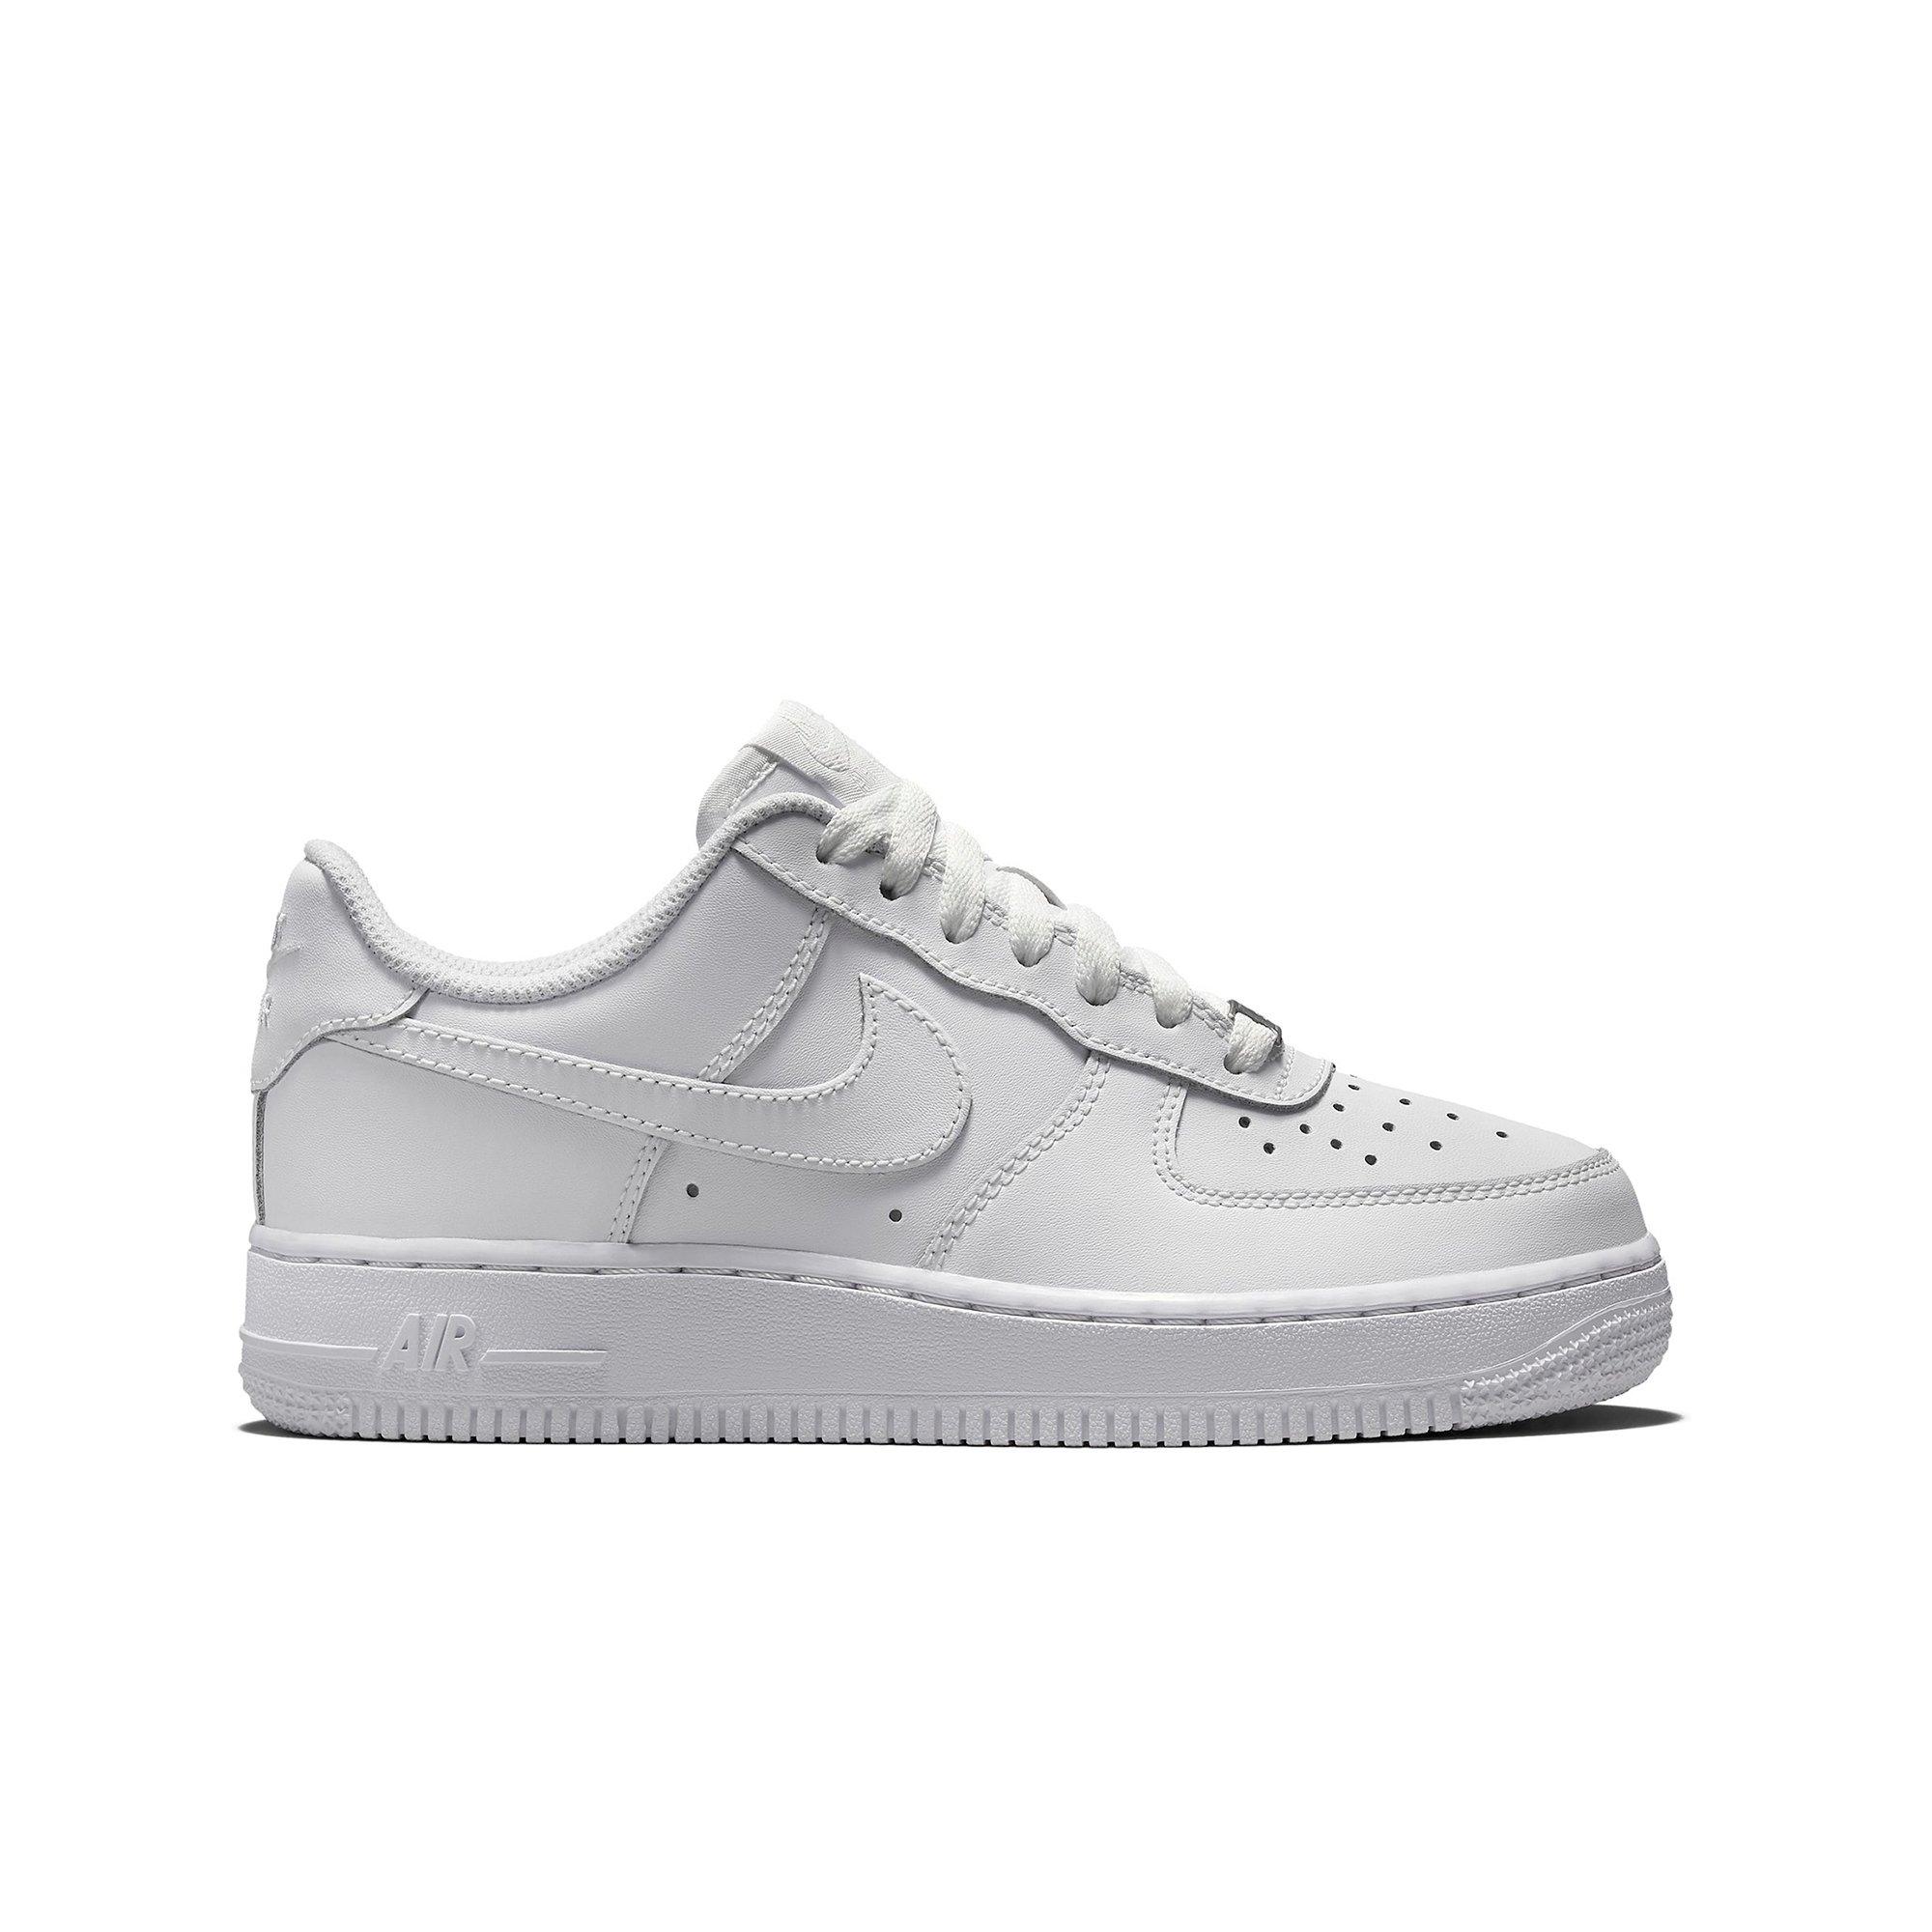 air force 1 girl shoes size 4